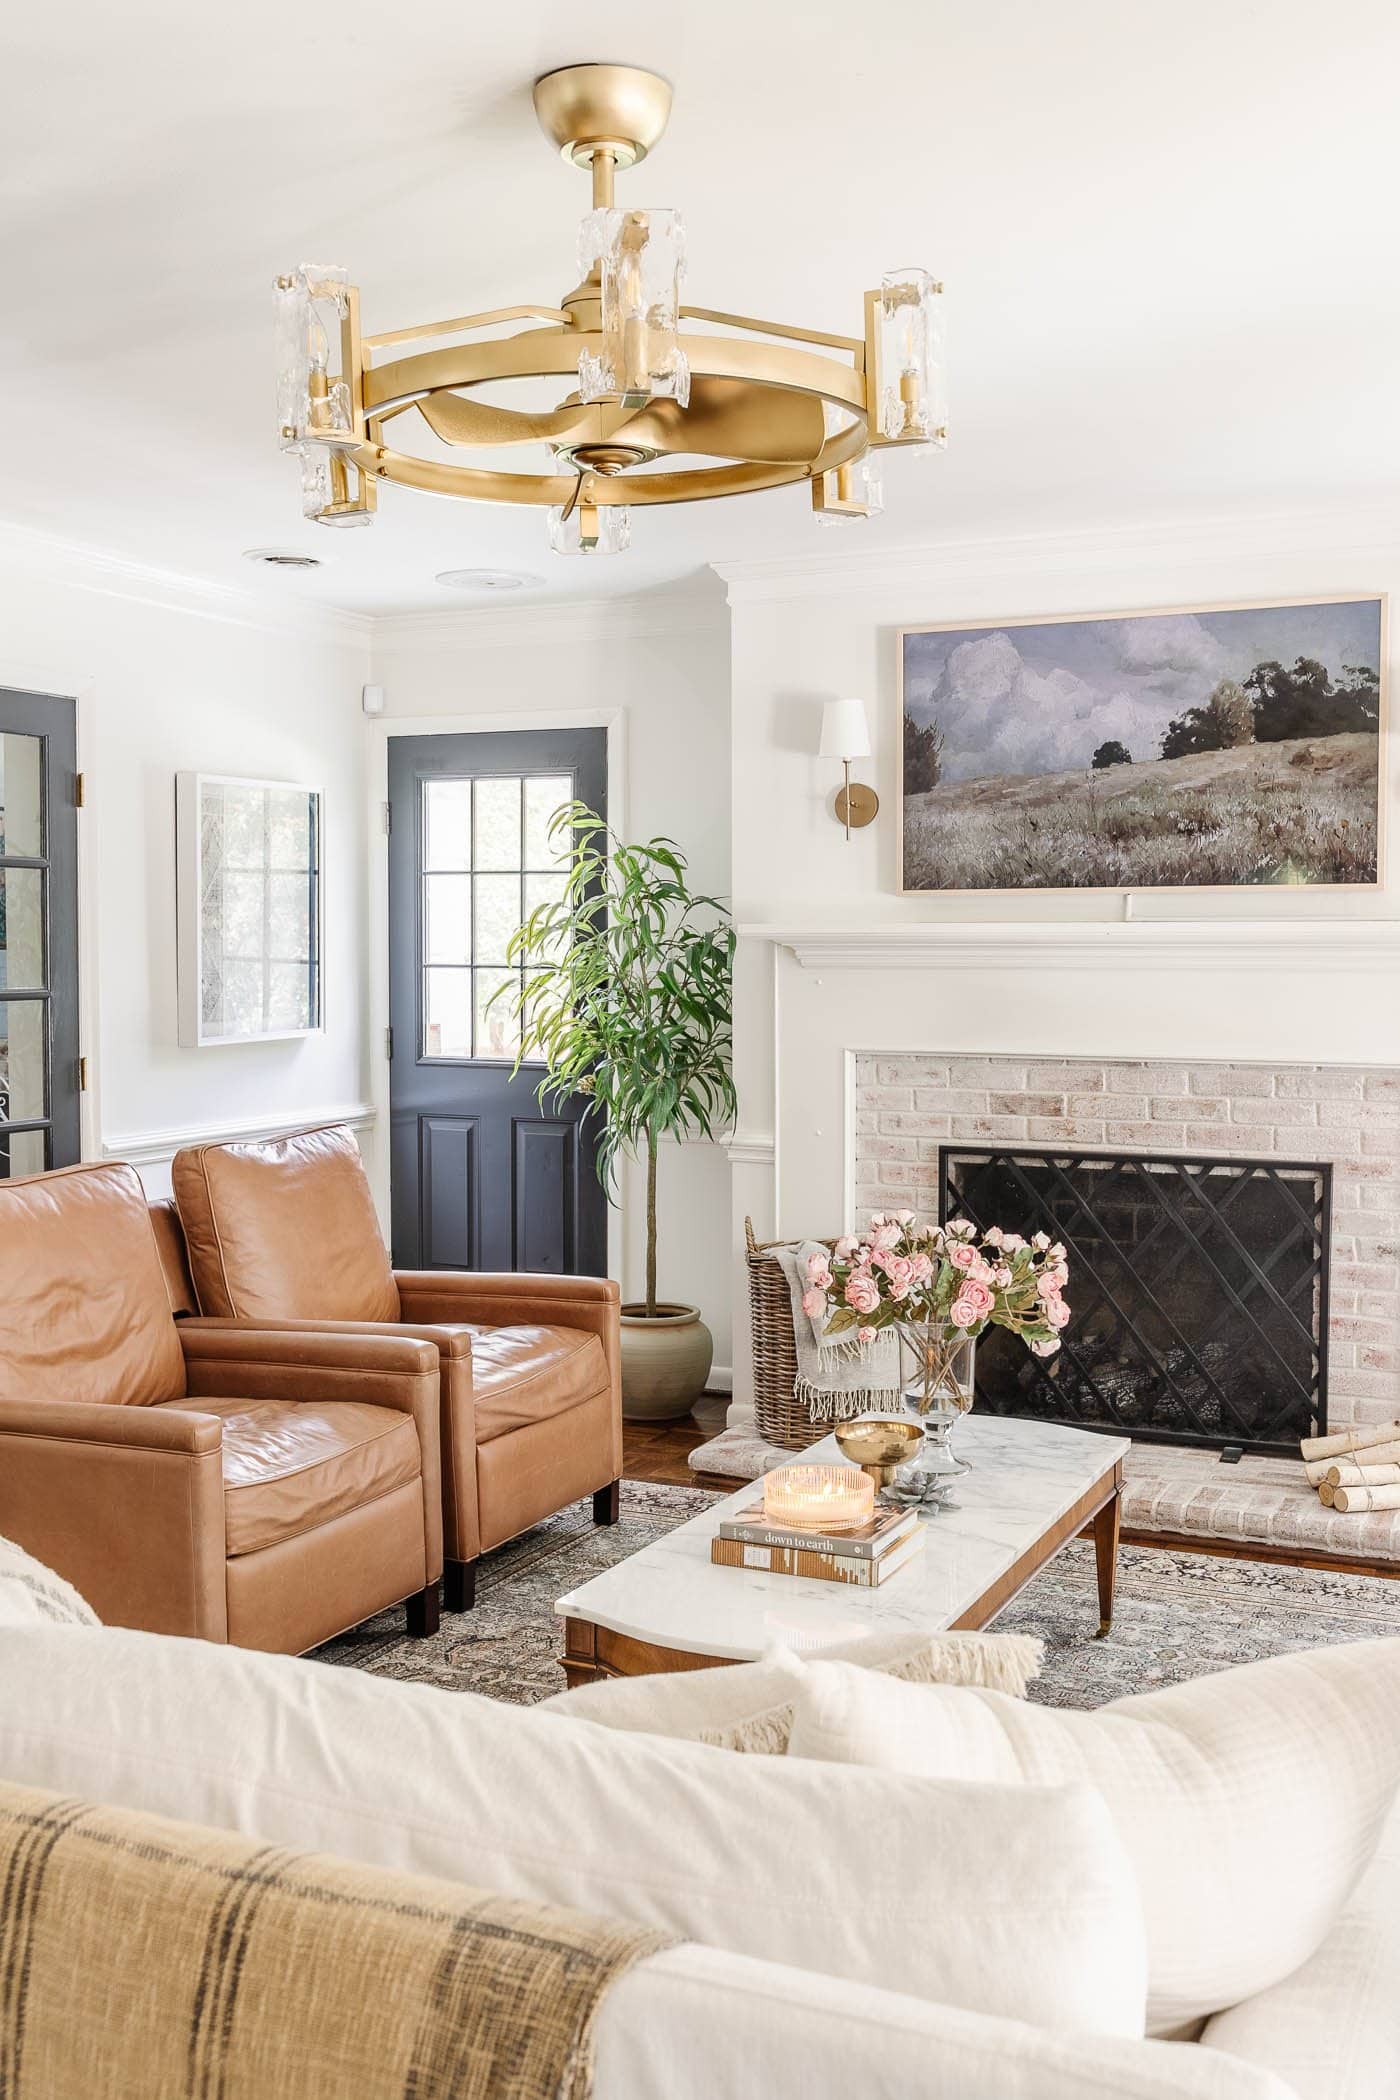 old door in a living room with leather recliners, lime washed brick fireplace, and fandelier